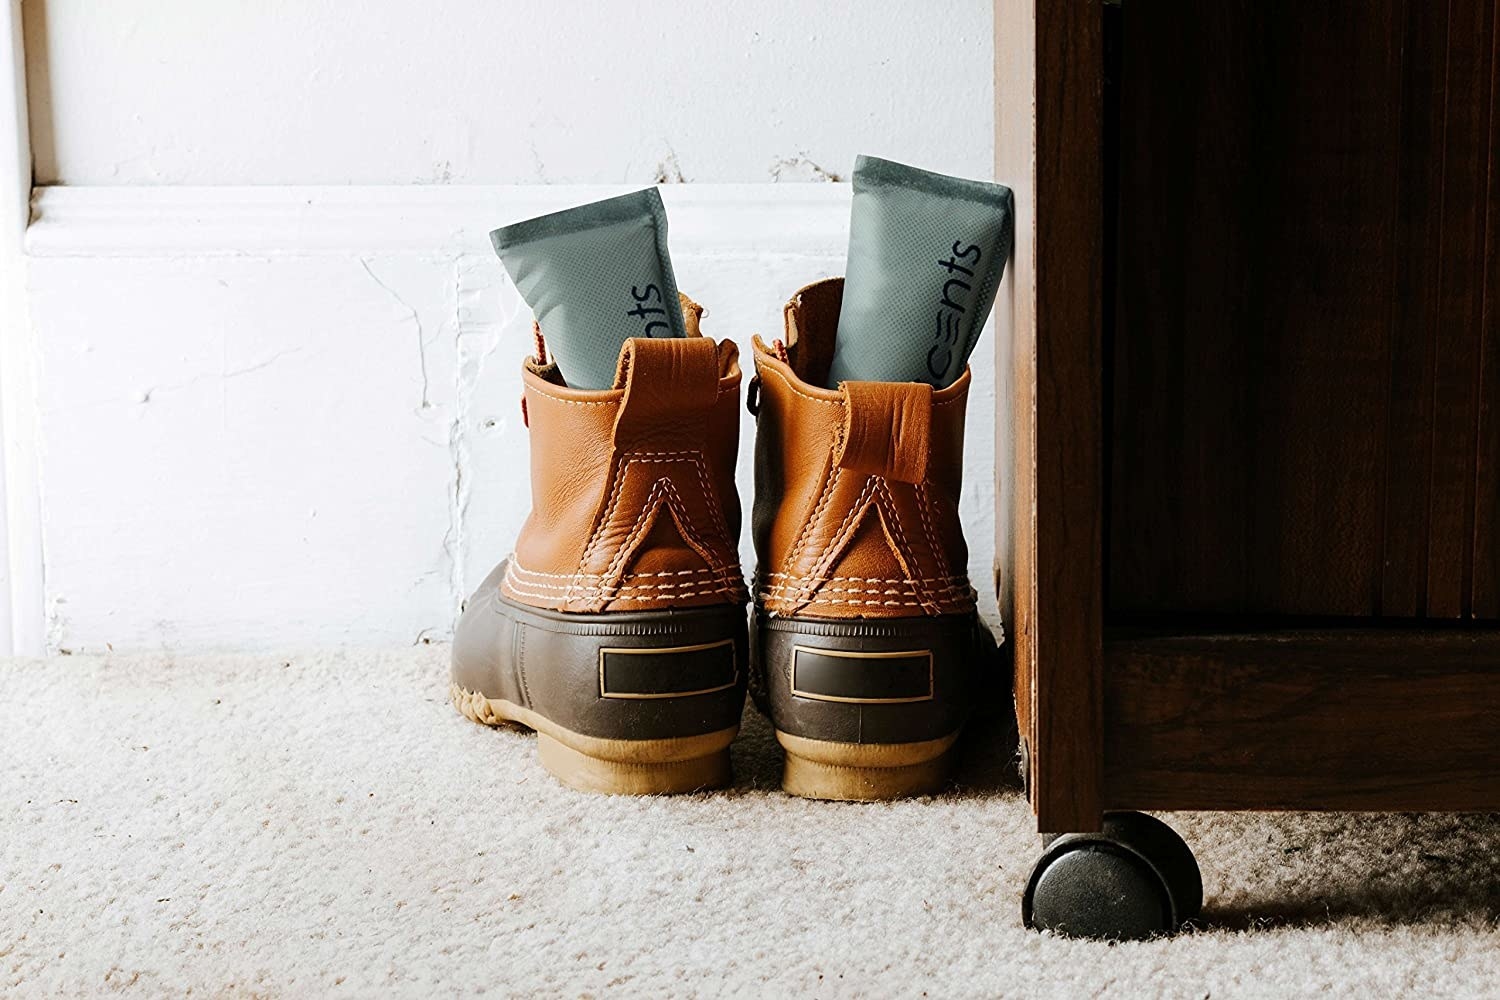 A set of a grey shoe deodorizers in a pair of brown work boots.